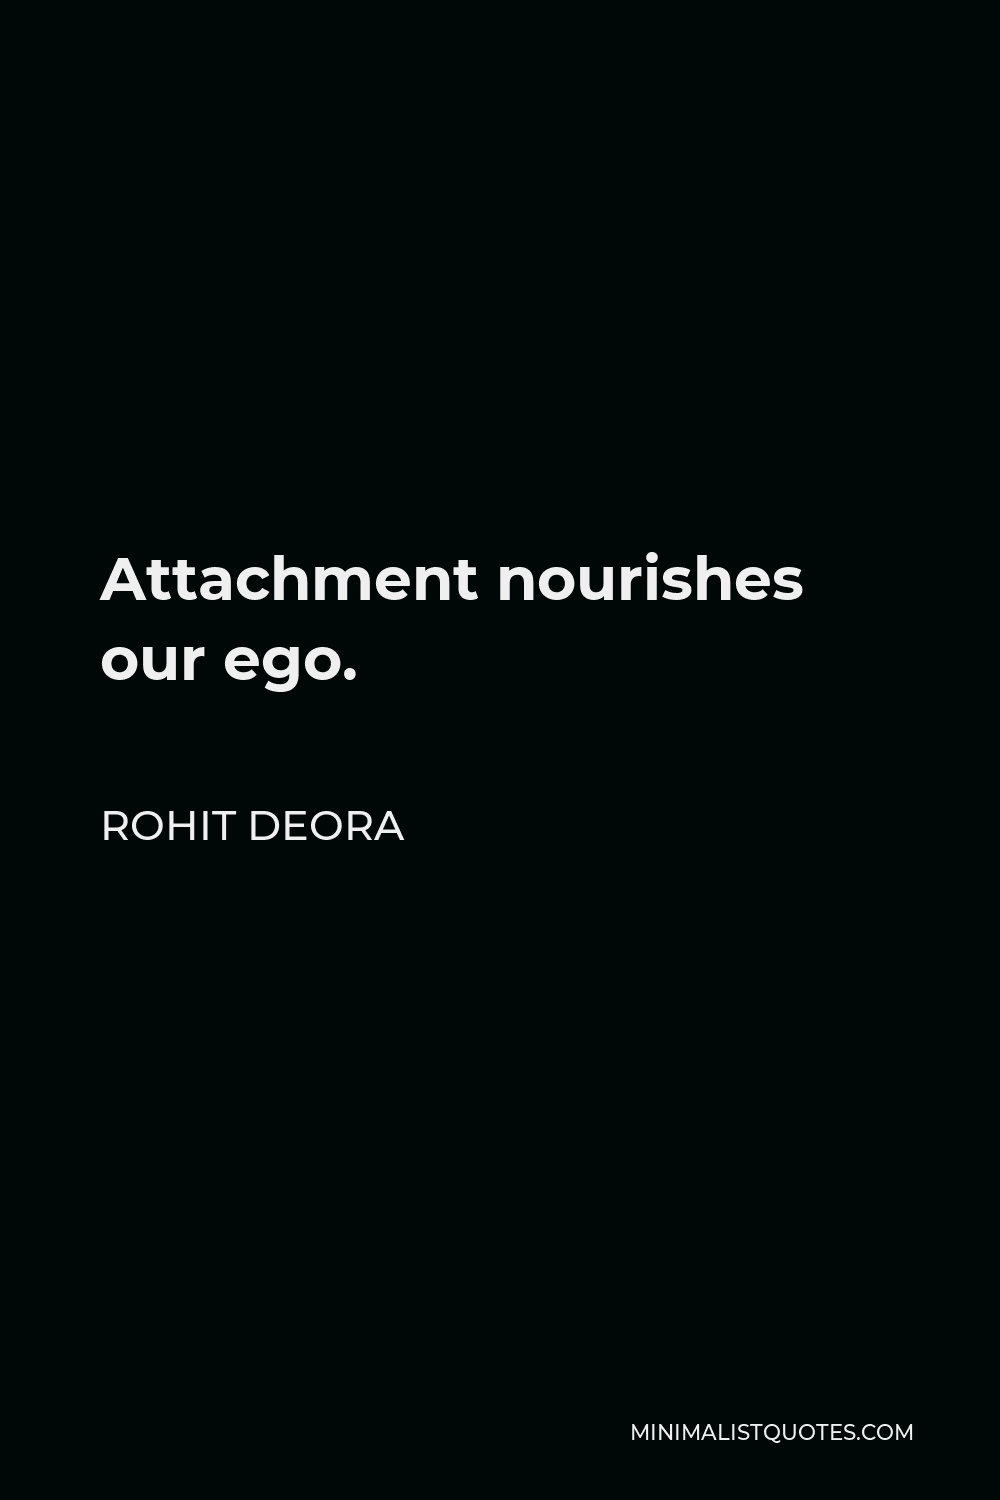 Rohit Deora Quote - Attachment nourishes our ego.